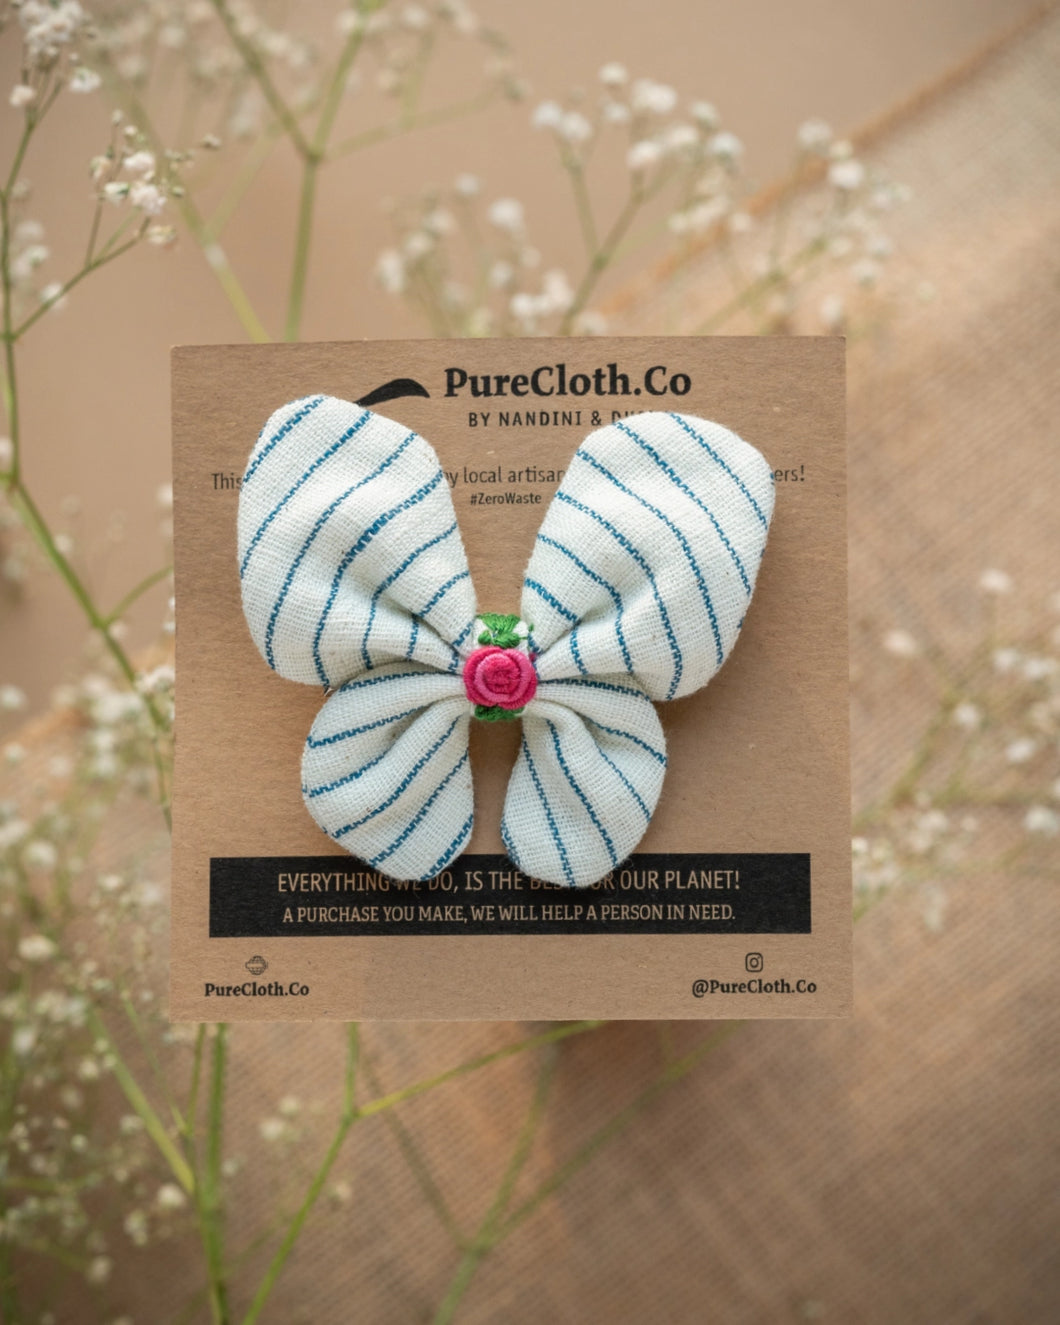 A cute butterfly hair accessories tied on a brown card placed upon a flower.